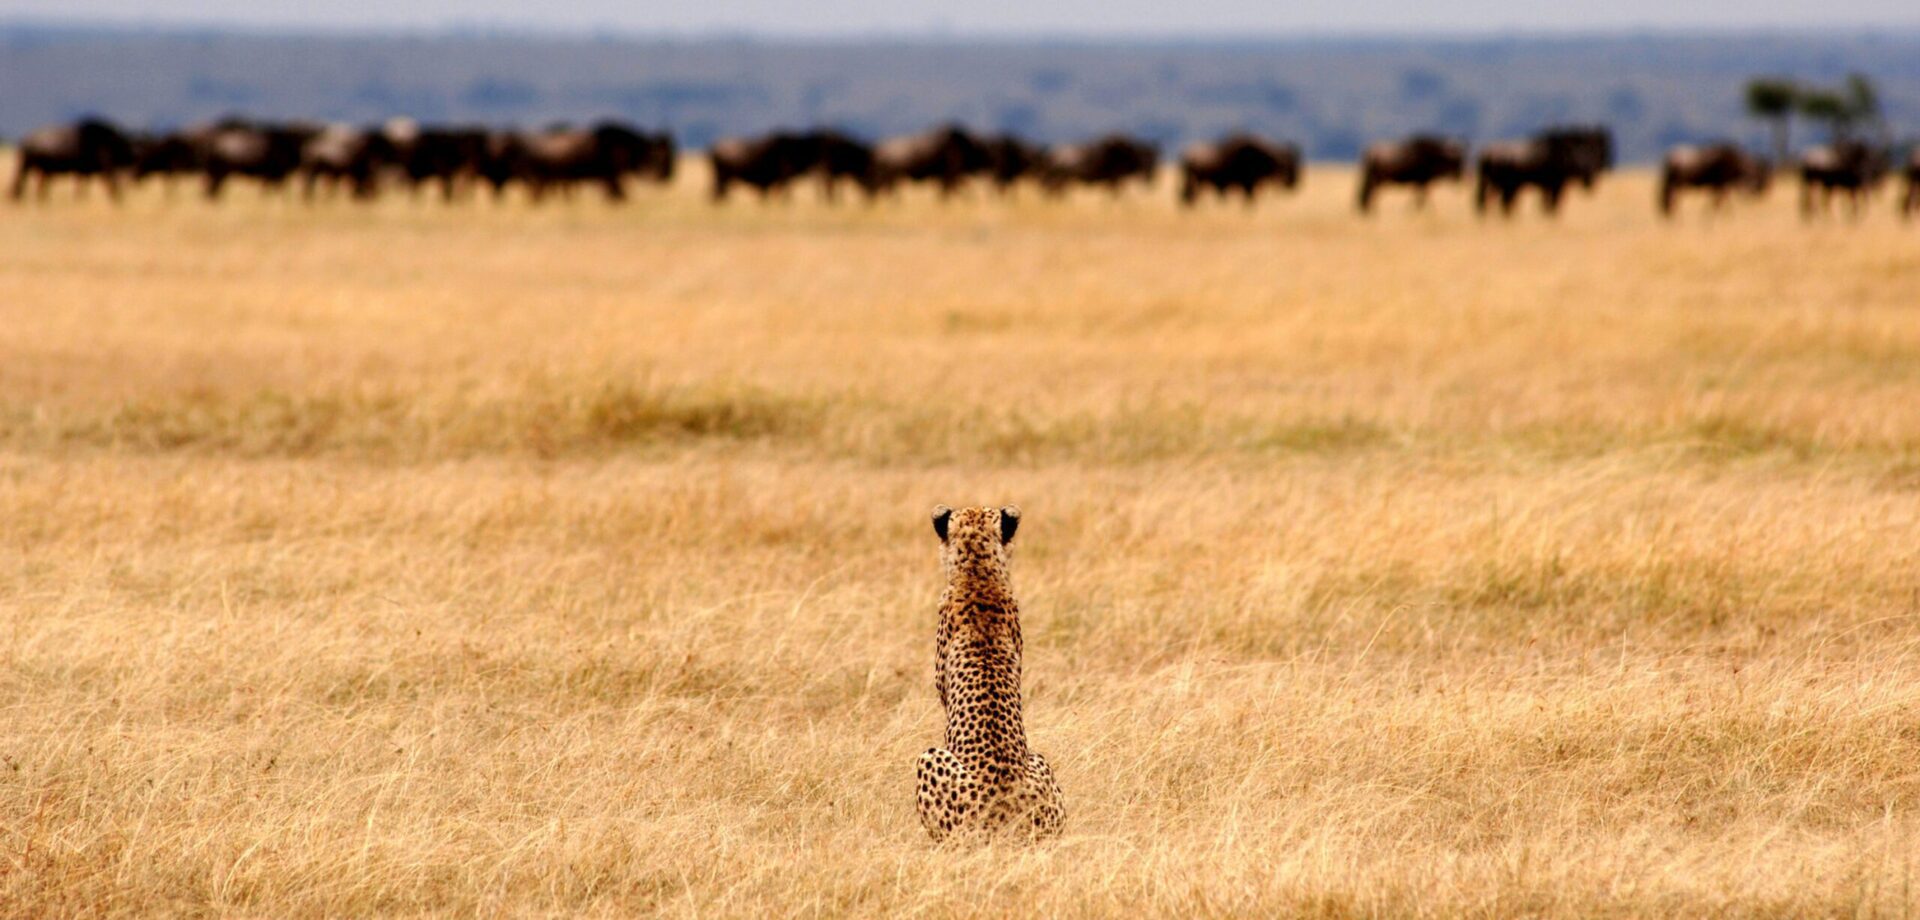 cheetah in a grassy plain looking at herd